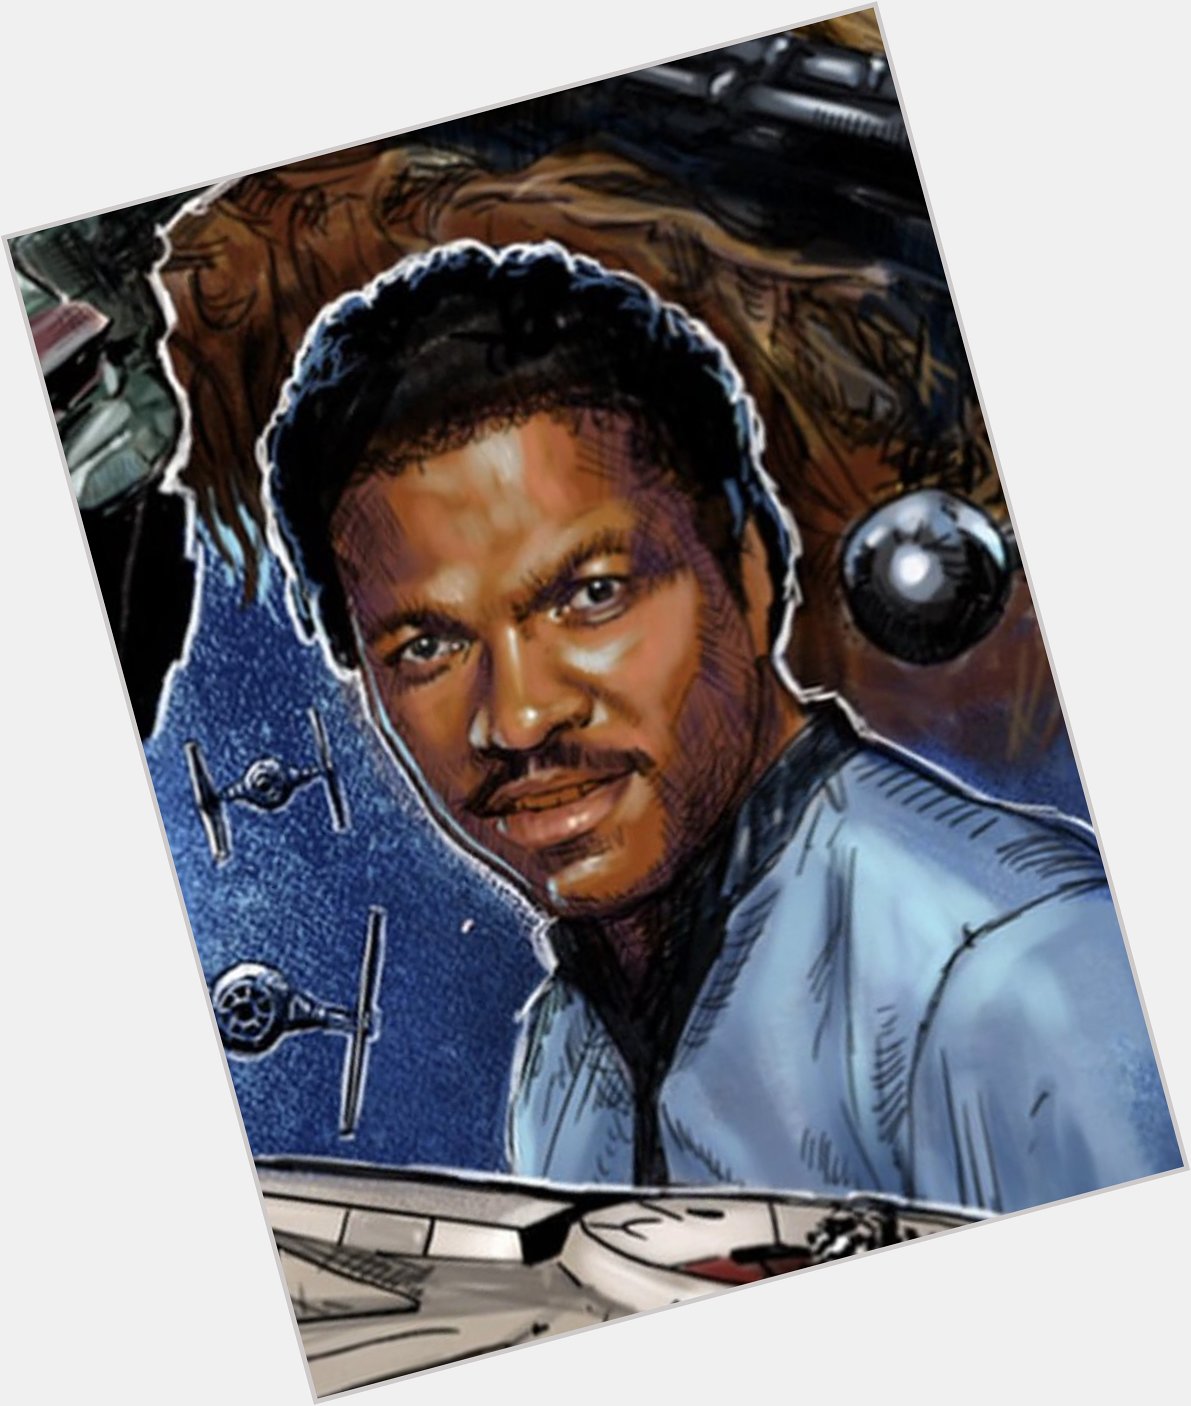 A very happy birthday to Billy Dee Williams. 